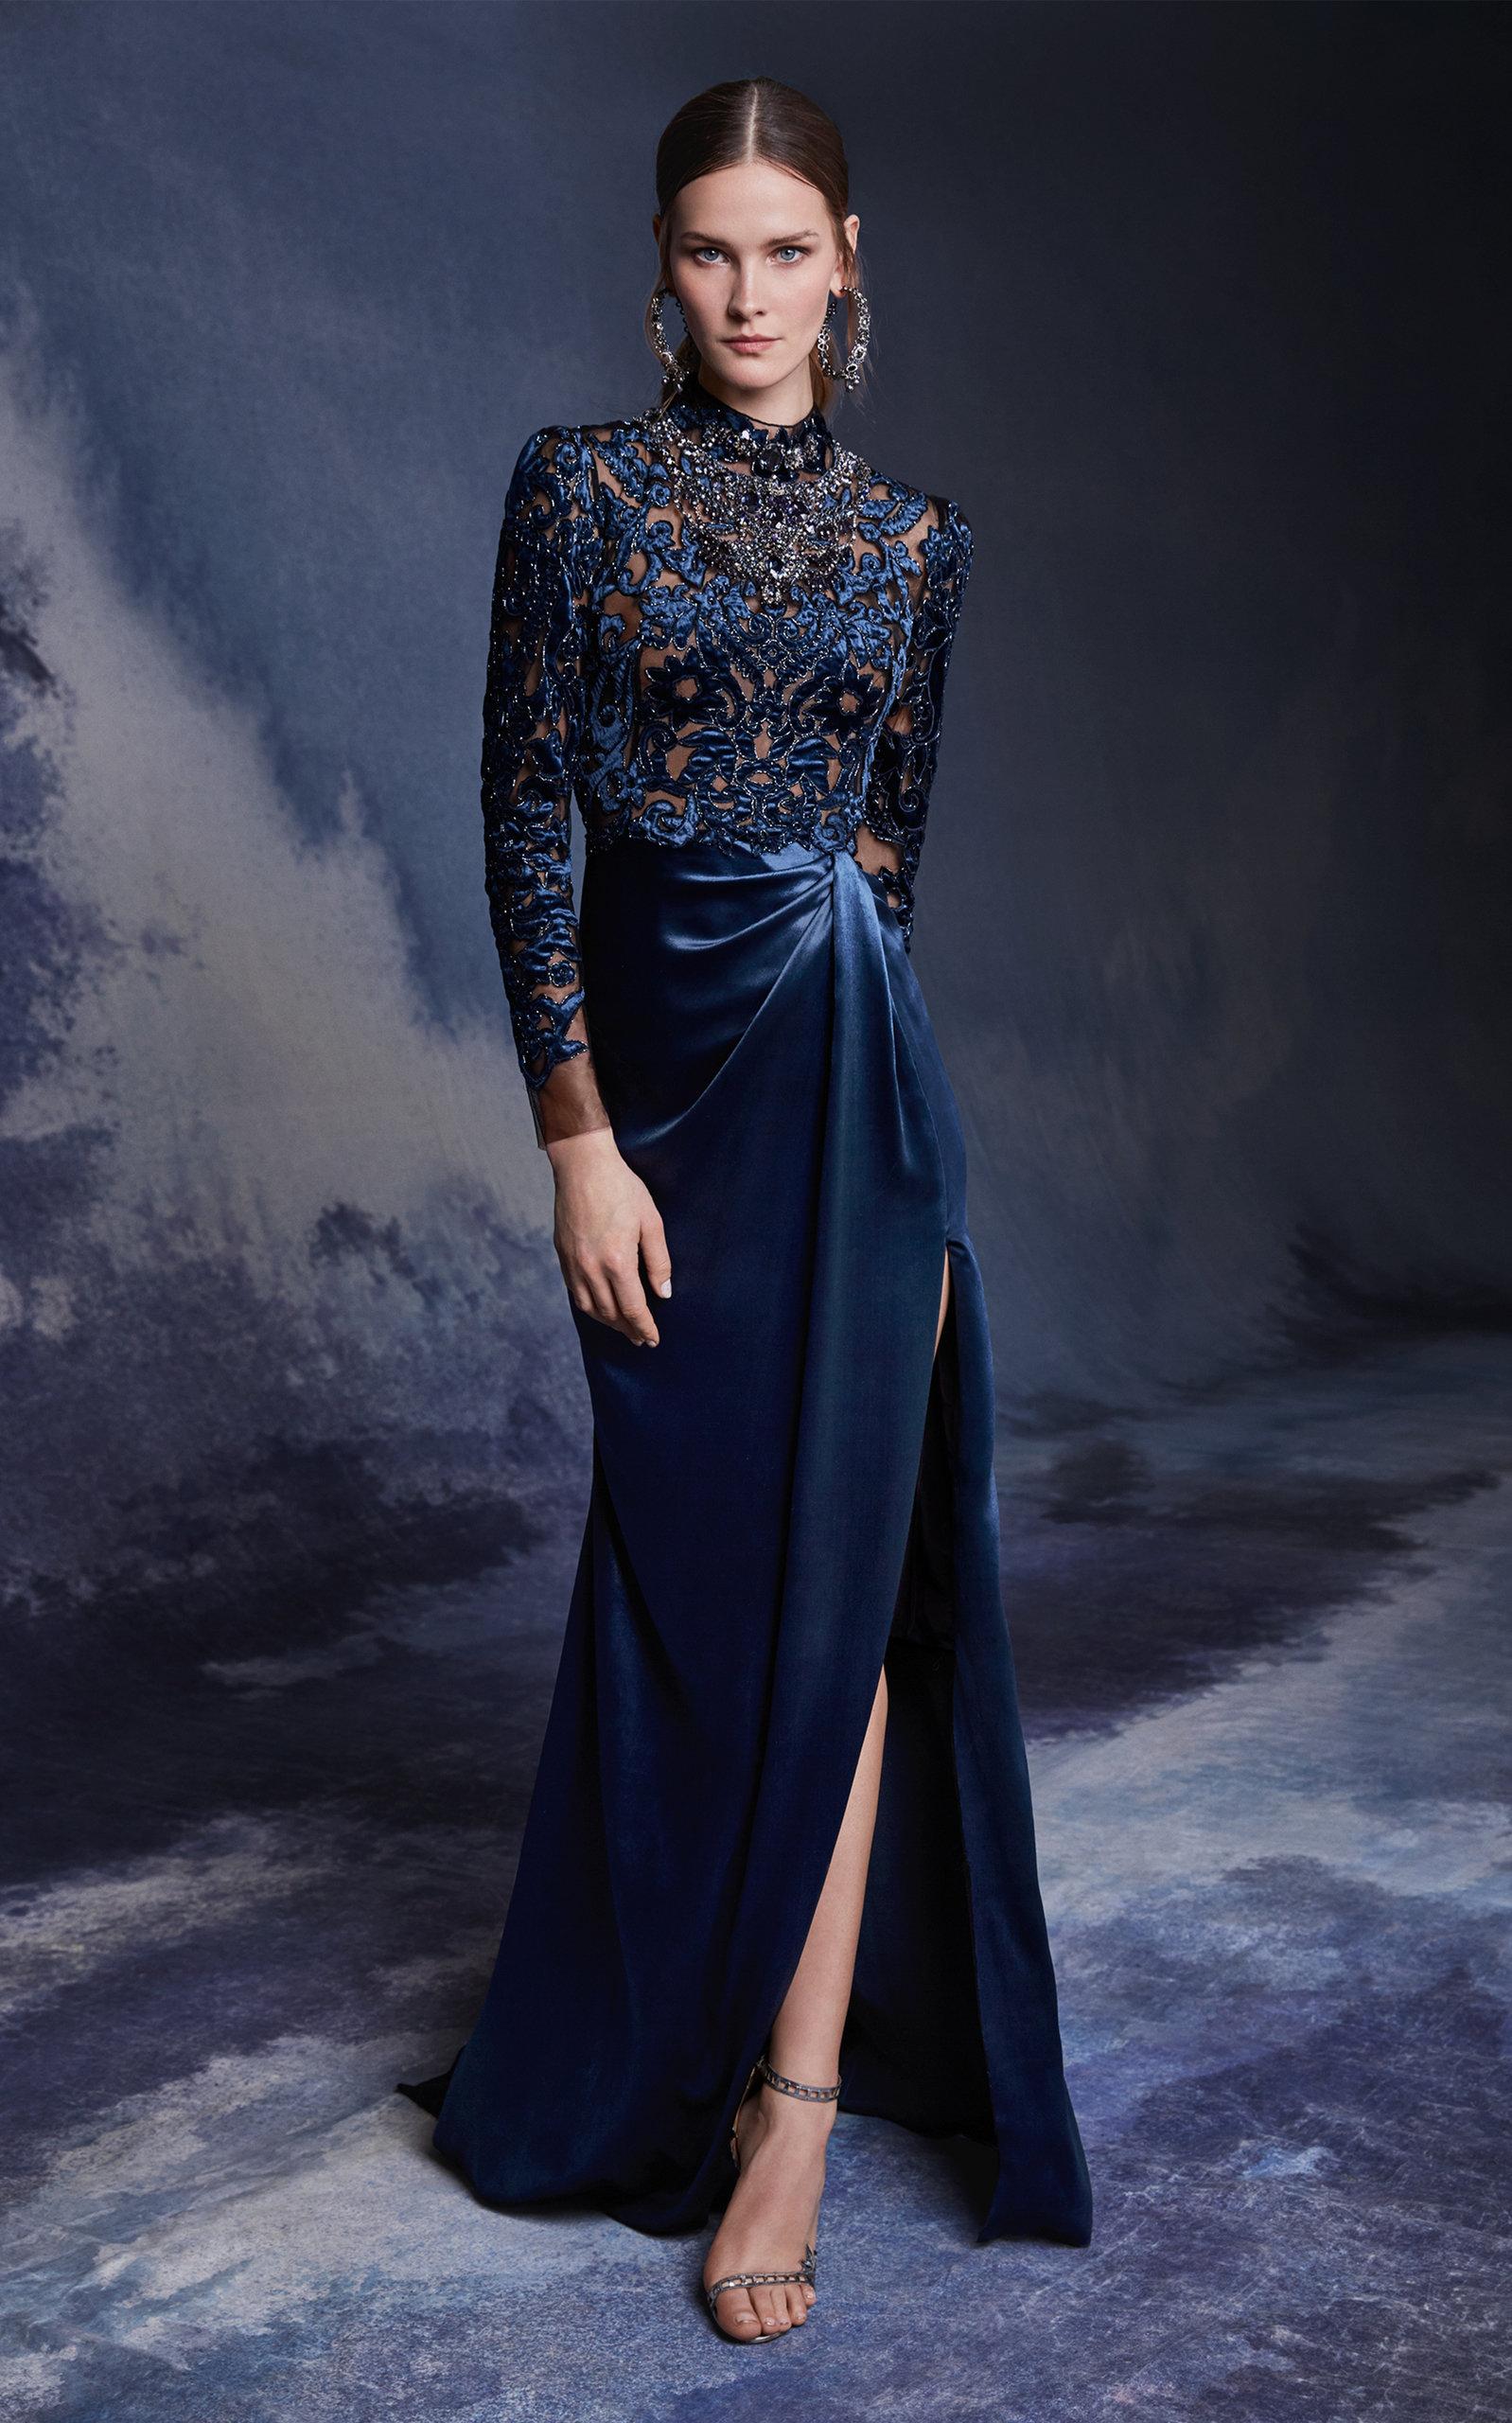 Ethnic Gowns | Navy Blue Velvet Gown | Freeup